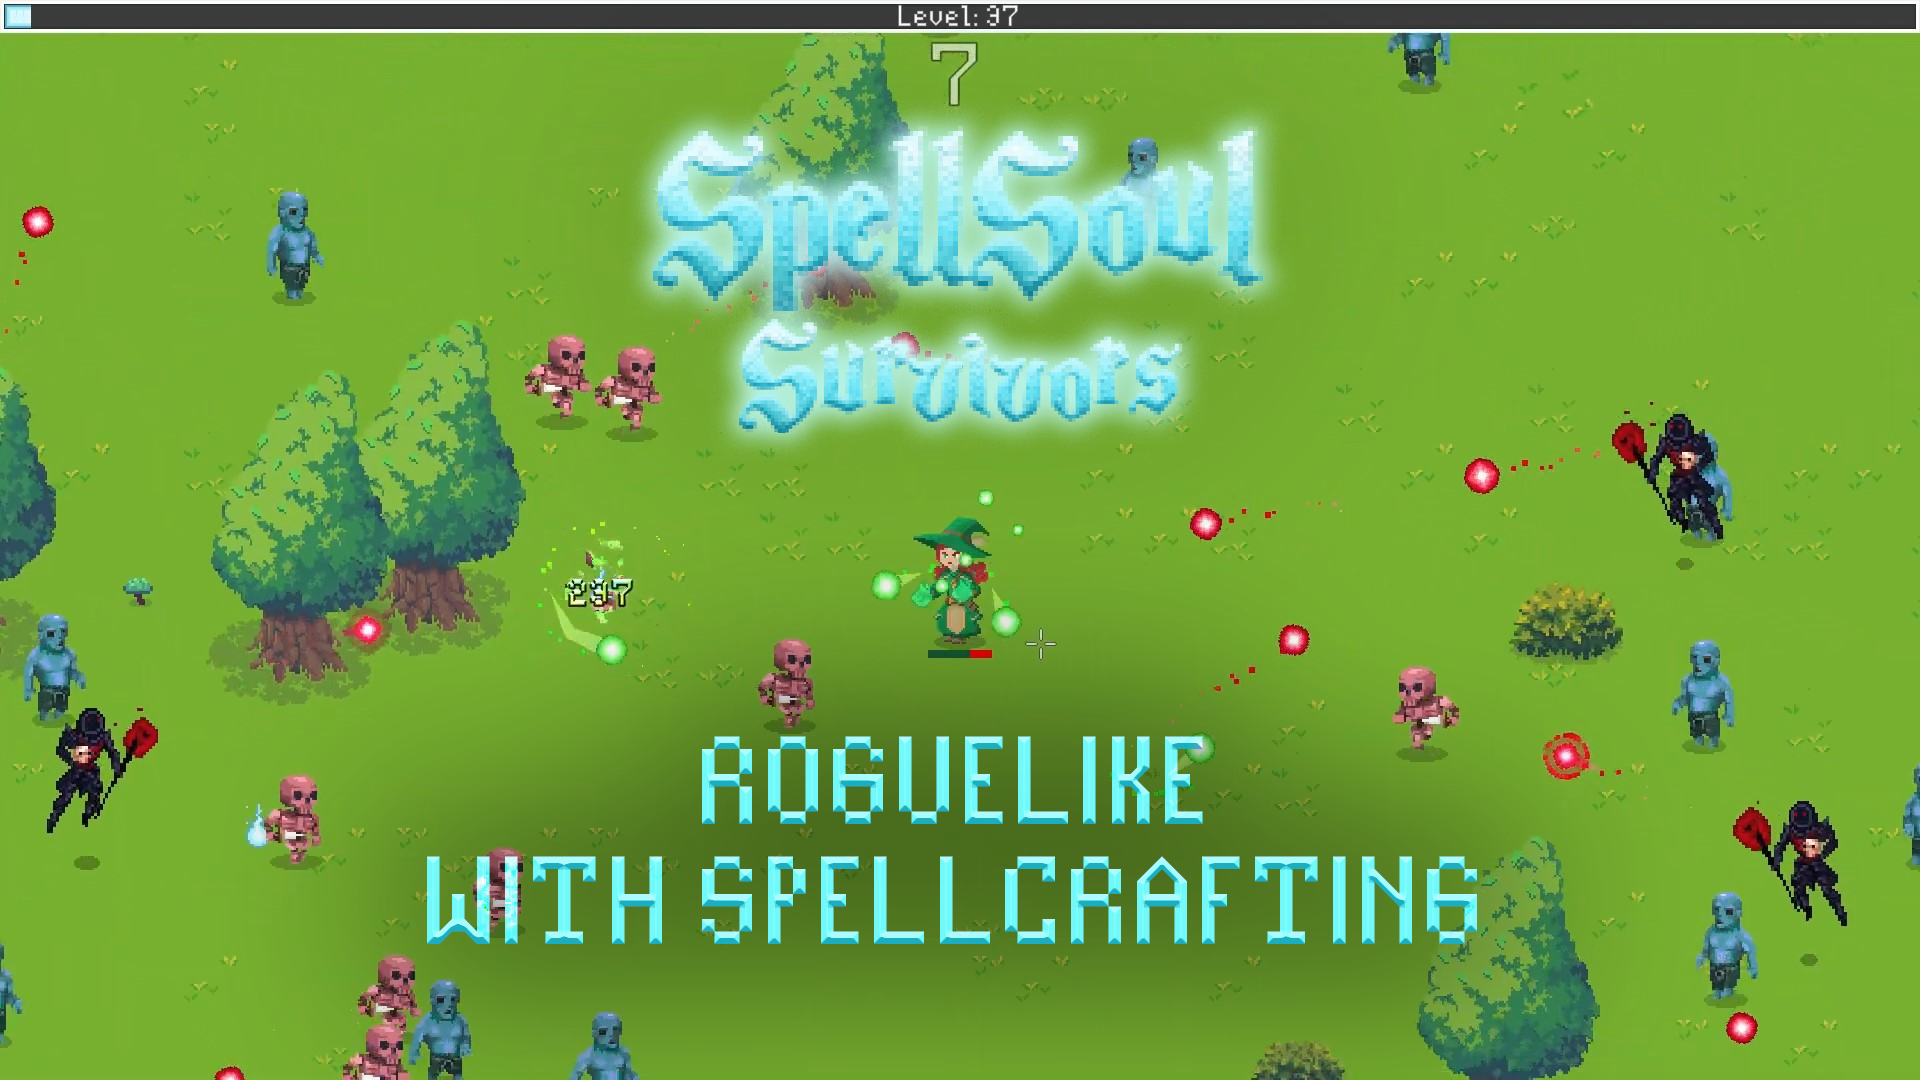 SPELLSOUL SURVIVORS - a roguelike horde shooter with spell crafting